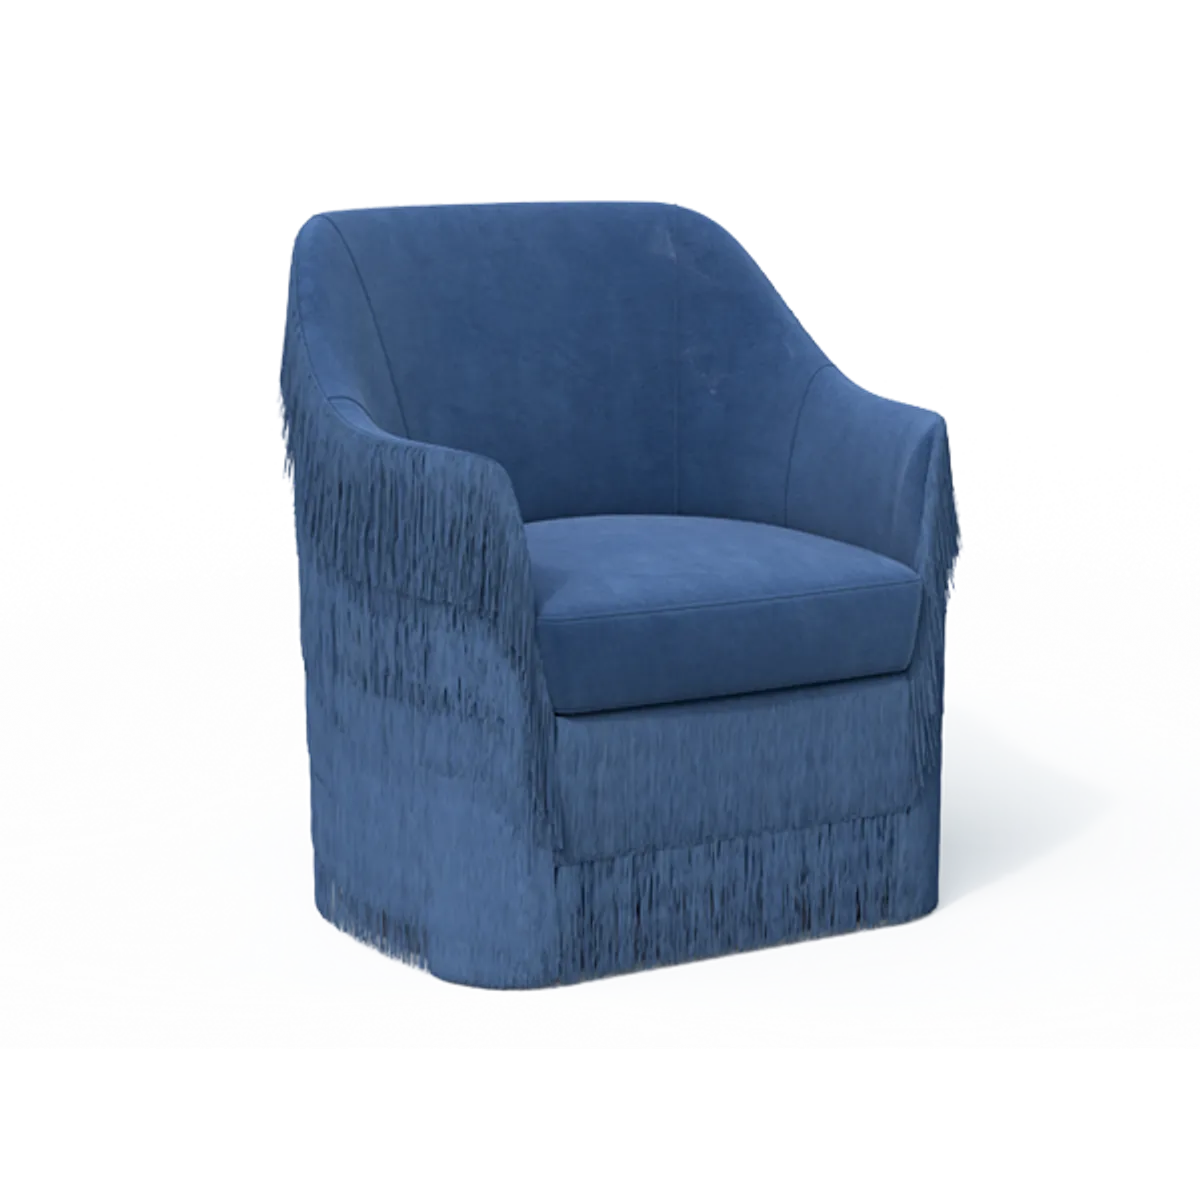 Dakota Lounge Chair Inside Out Contracts Bespoke